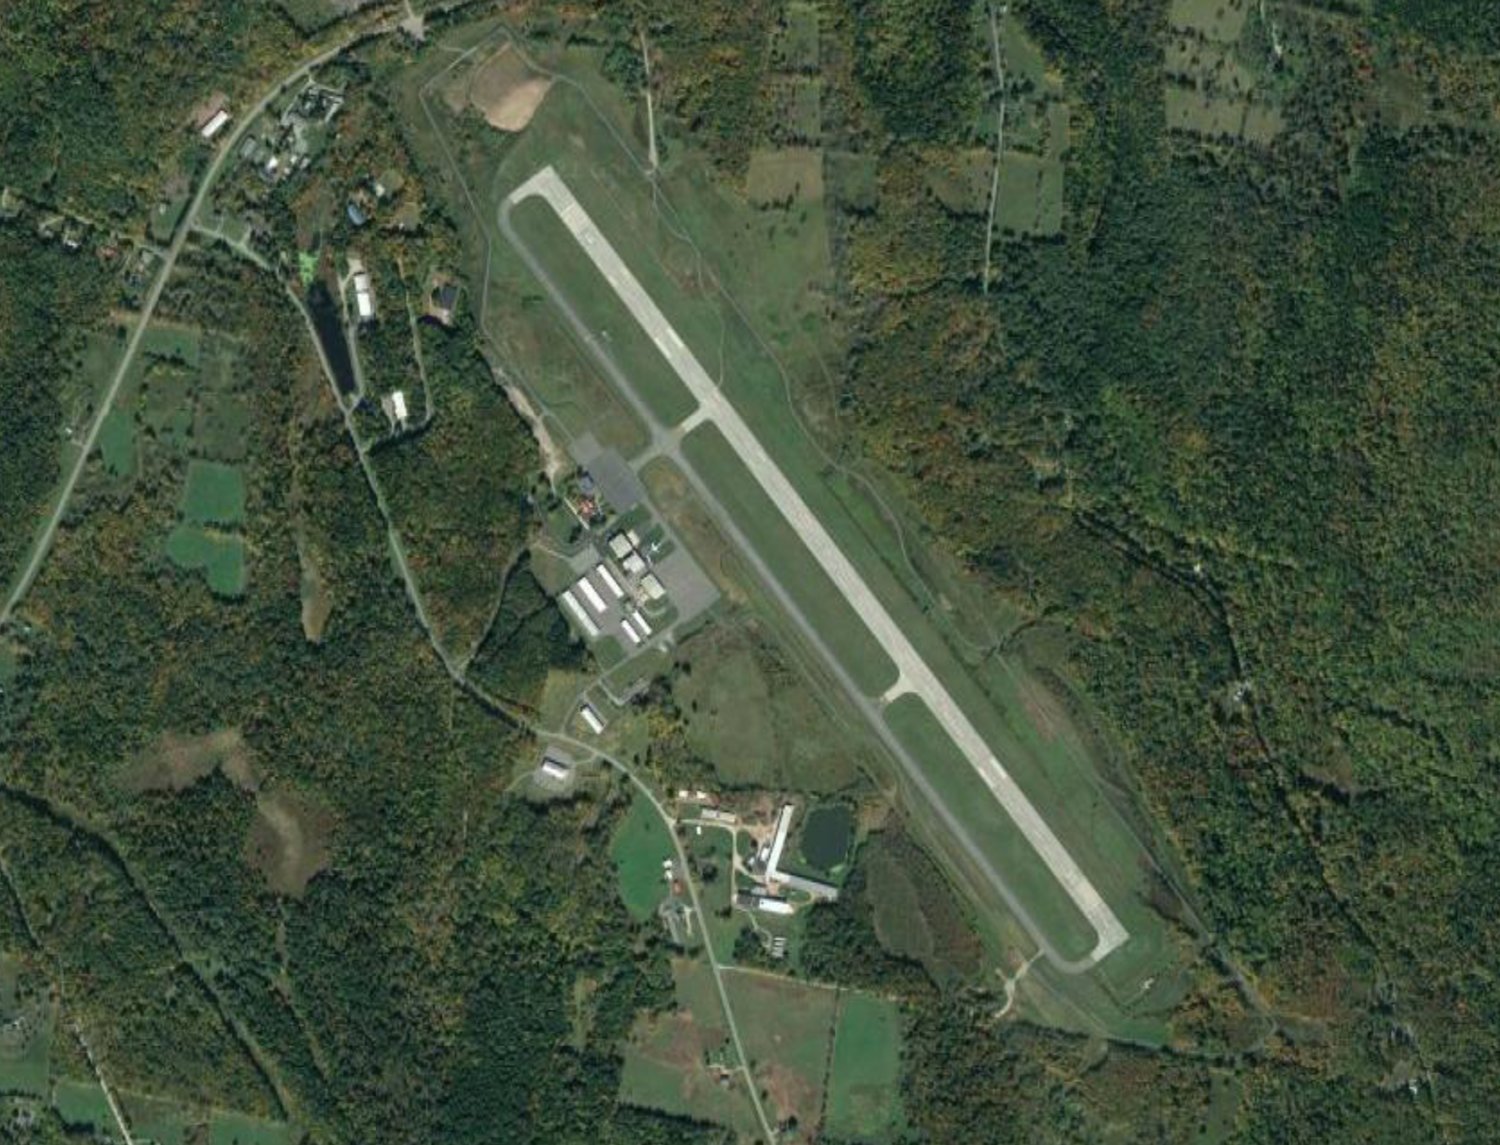 According to the New York State Department of Environmental Conservation, the superfund site includes the western portion of the airport and covers approximately 116 acres.